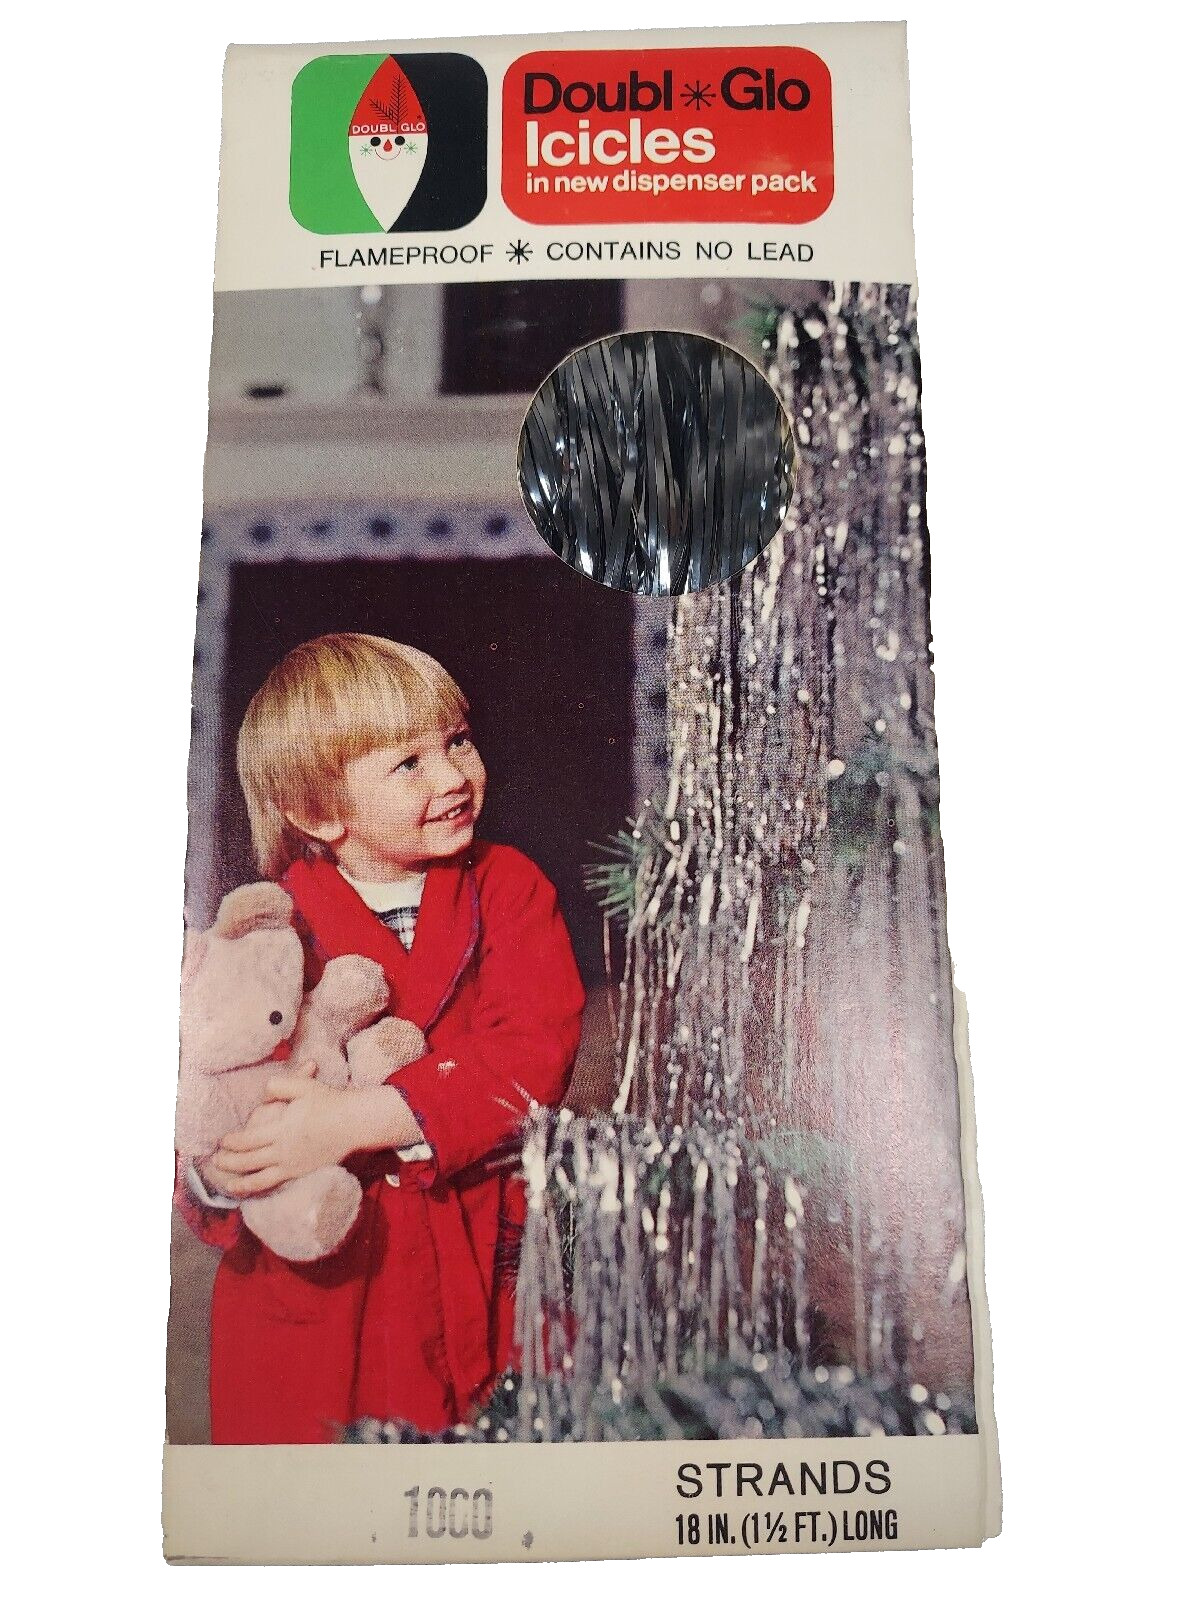 Vintage Christmas Icicles 1000 Strands - Doubl* Glo, Double Glo - Sold at Gemco